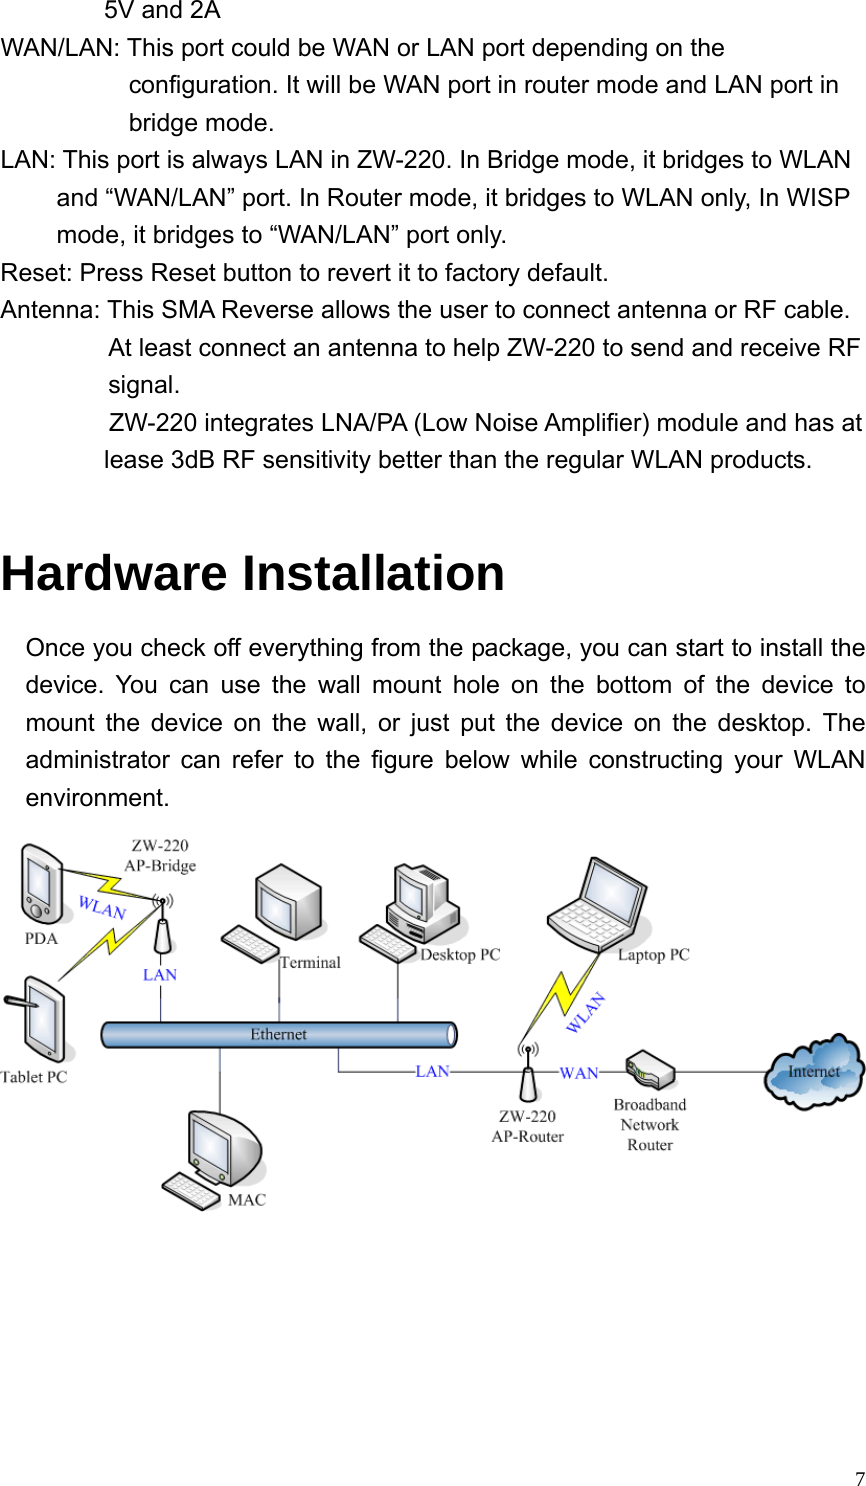  75V and 2A WAN/LAN: This port could be WAN or LAN port depending on the configuration. It will be WAN port in router mode and LAN port in bridge mode. LAN: This port is always LAN in ZW-220. In Bridge mode, it bridges to WLAN and “WAN/LAN” port. In Router mode, it bridges to WLAN only, In WISP mode, it bridges to “WAN/LAN” port only. Reset: Press Reset button to revert it to factory default. Antenna: This SMA Reverse allows the user to connect antenna or RF cable. At least connect an antenna to help ZW-220 to send and receive RF signal.          ZW-220 integrates LNA/PA (Low Noise Amplifier) module and has at lease 3dB RF sensitivity better than the regular WLAN products.  Hardware Installation Once you check off everything from the package, you can start to install the device. You can use the wall mount hole on the bottom of the device to mount the device on the wall, or just put the device on the desktop. The administrator can refer to the figure below while constructing your WLAN environment.      